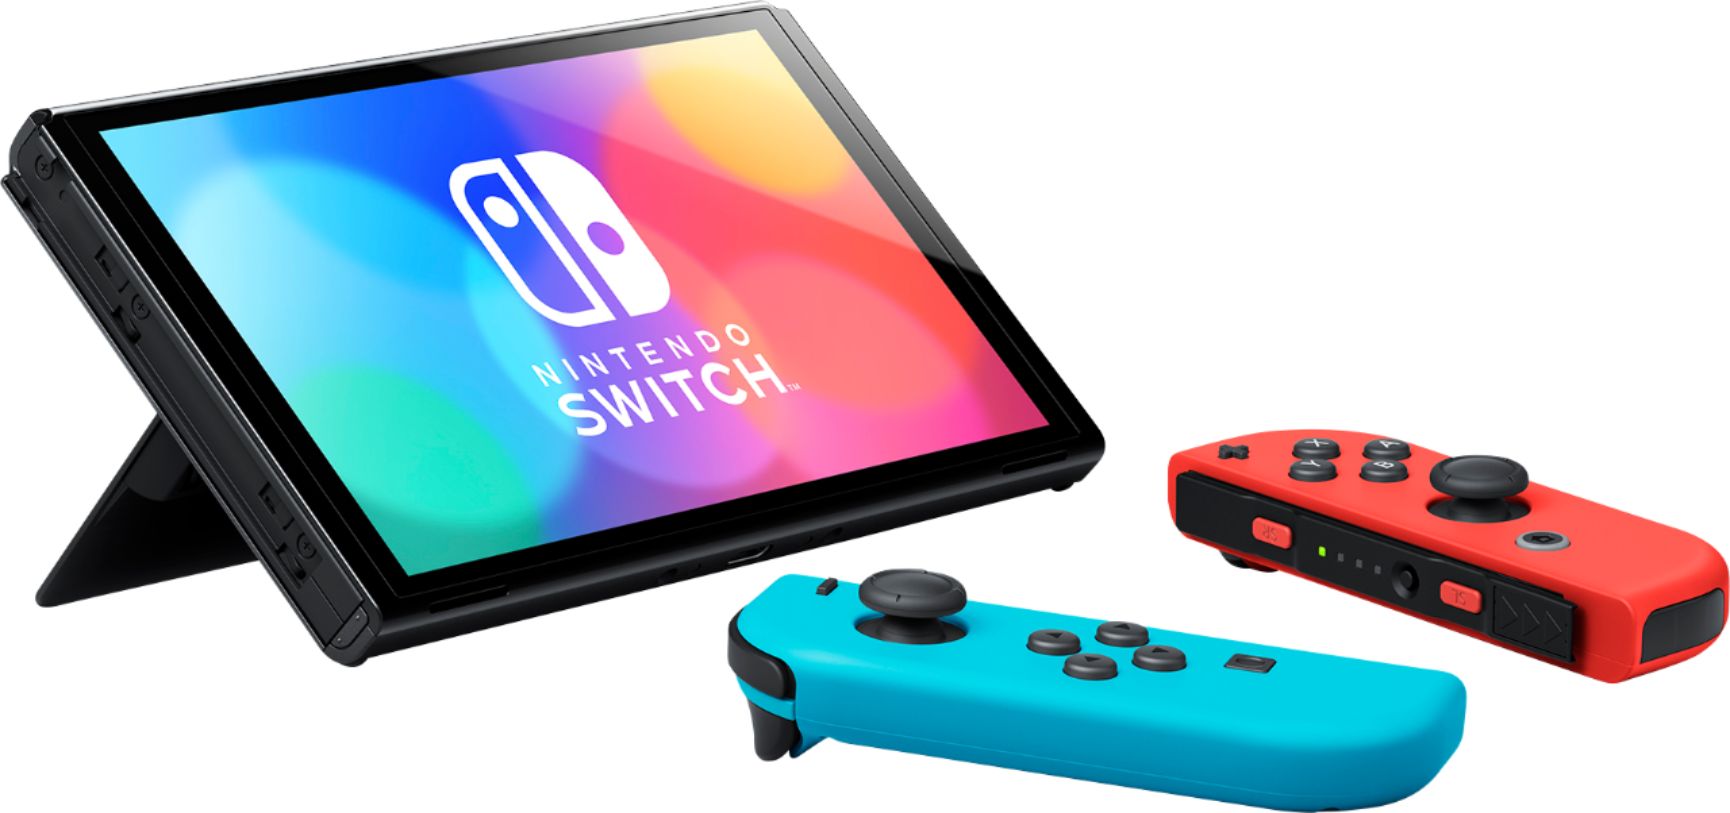 2022 New Nintendo Switch OLED Model Neon Red Blue with Super Mario Odyssey and Mytrix Full Body Skin Sticker for NS OLED Console, Dock and Joycons - Sushi Set